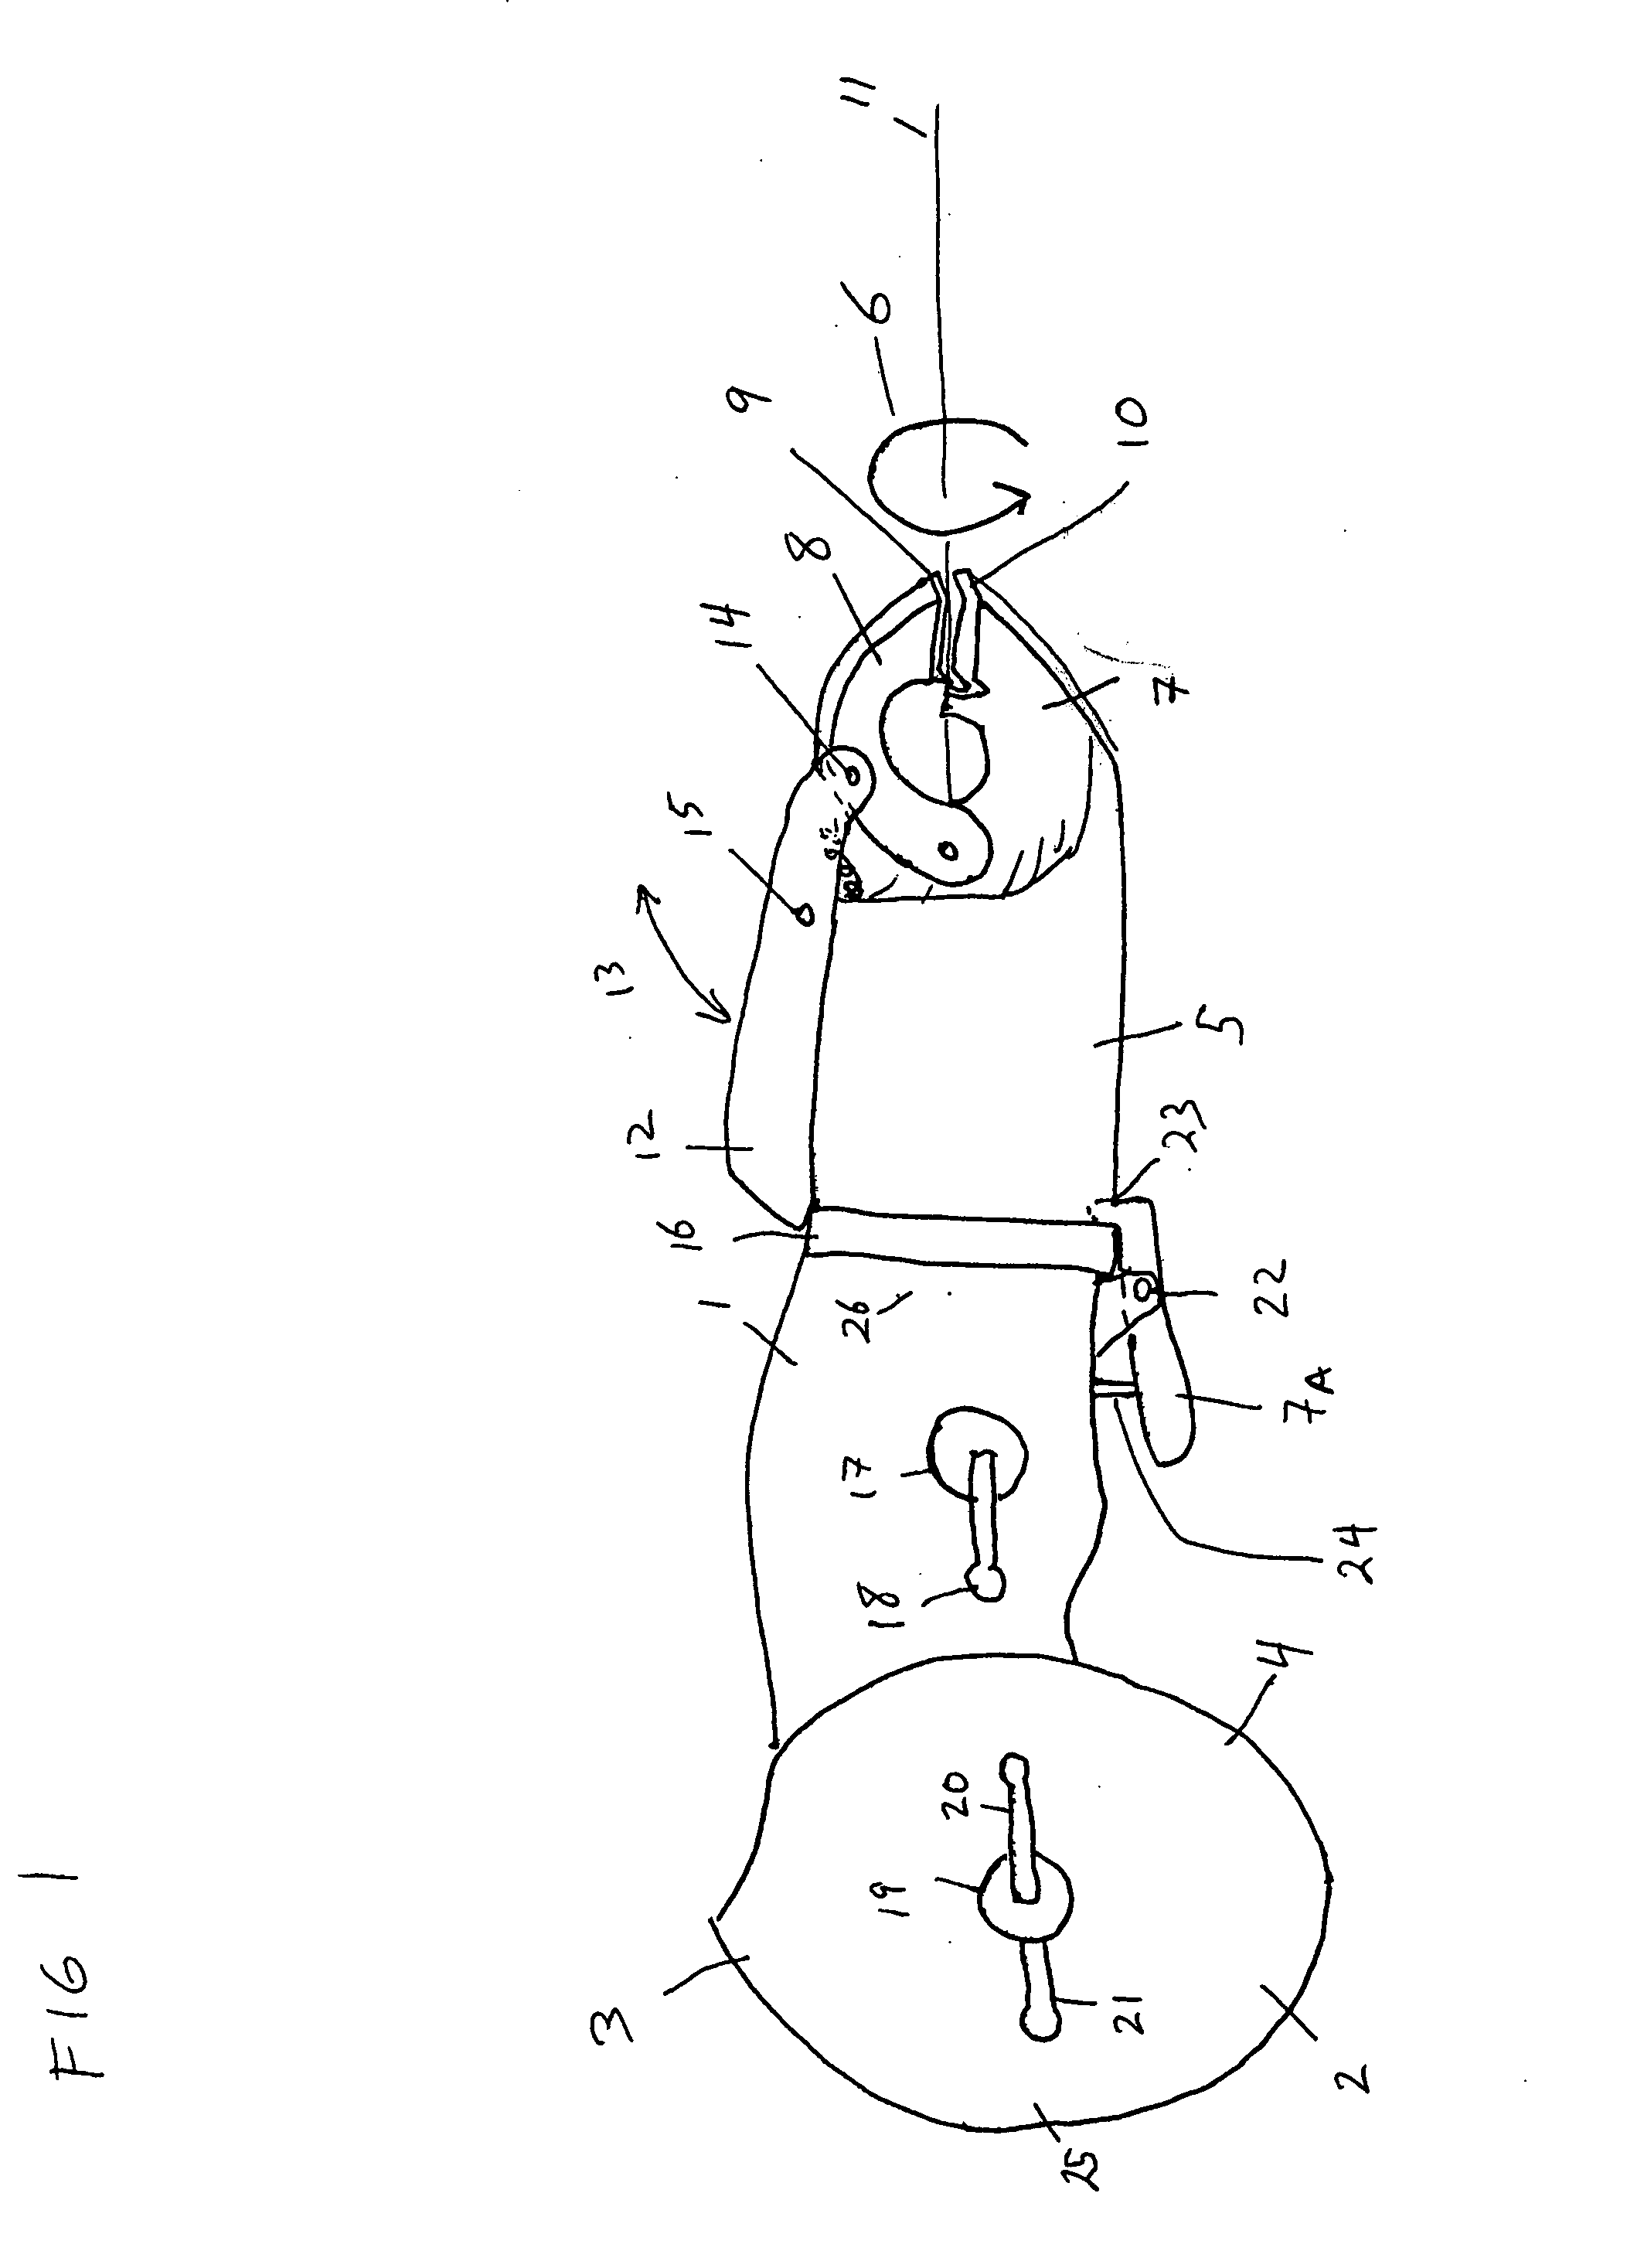 Wire cutting and twisting tool with spool assembly and manual wire feeding mechanism